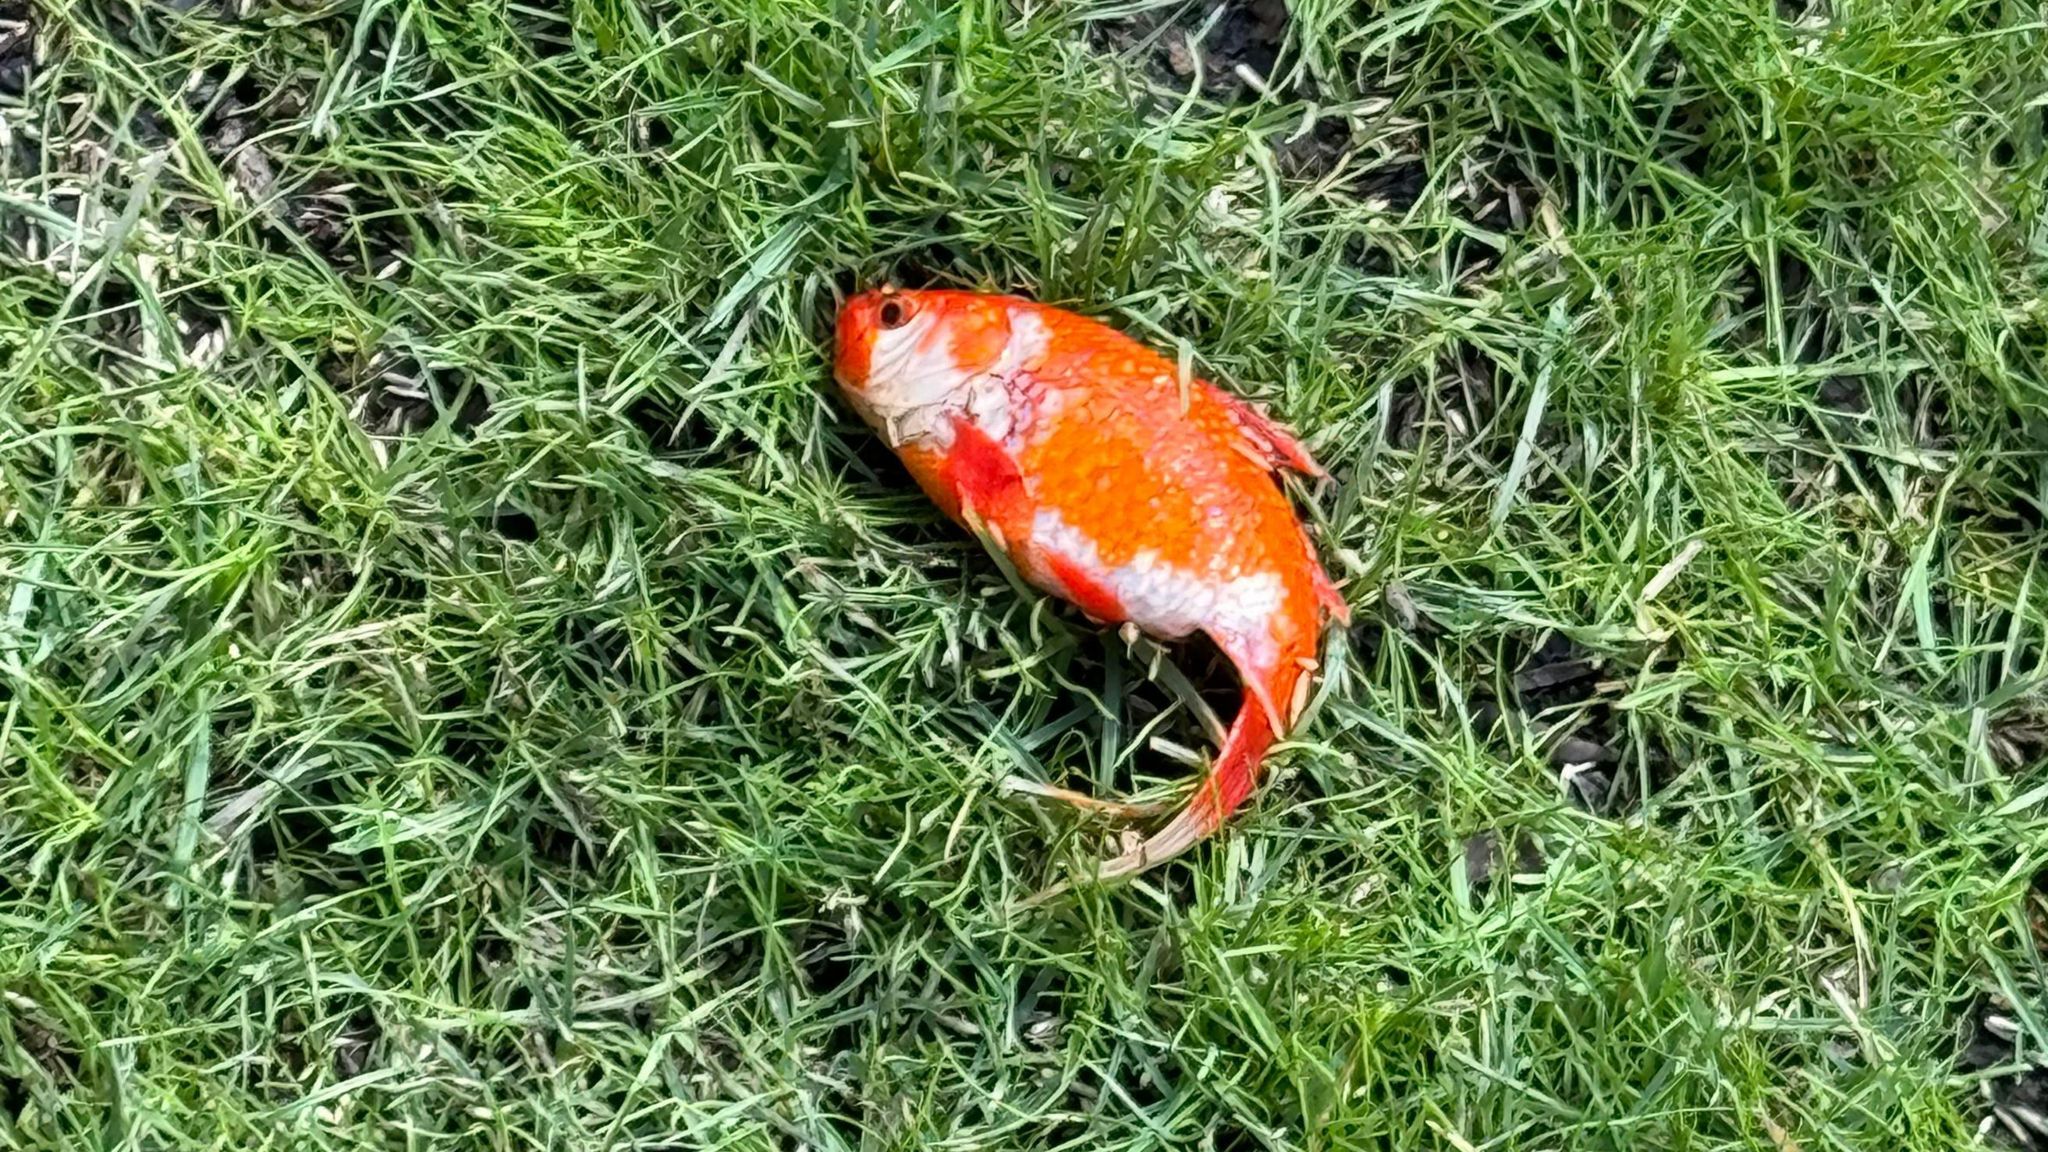 The goldfish lying on the grass